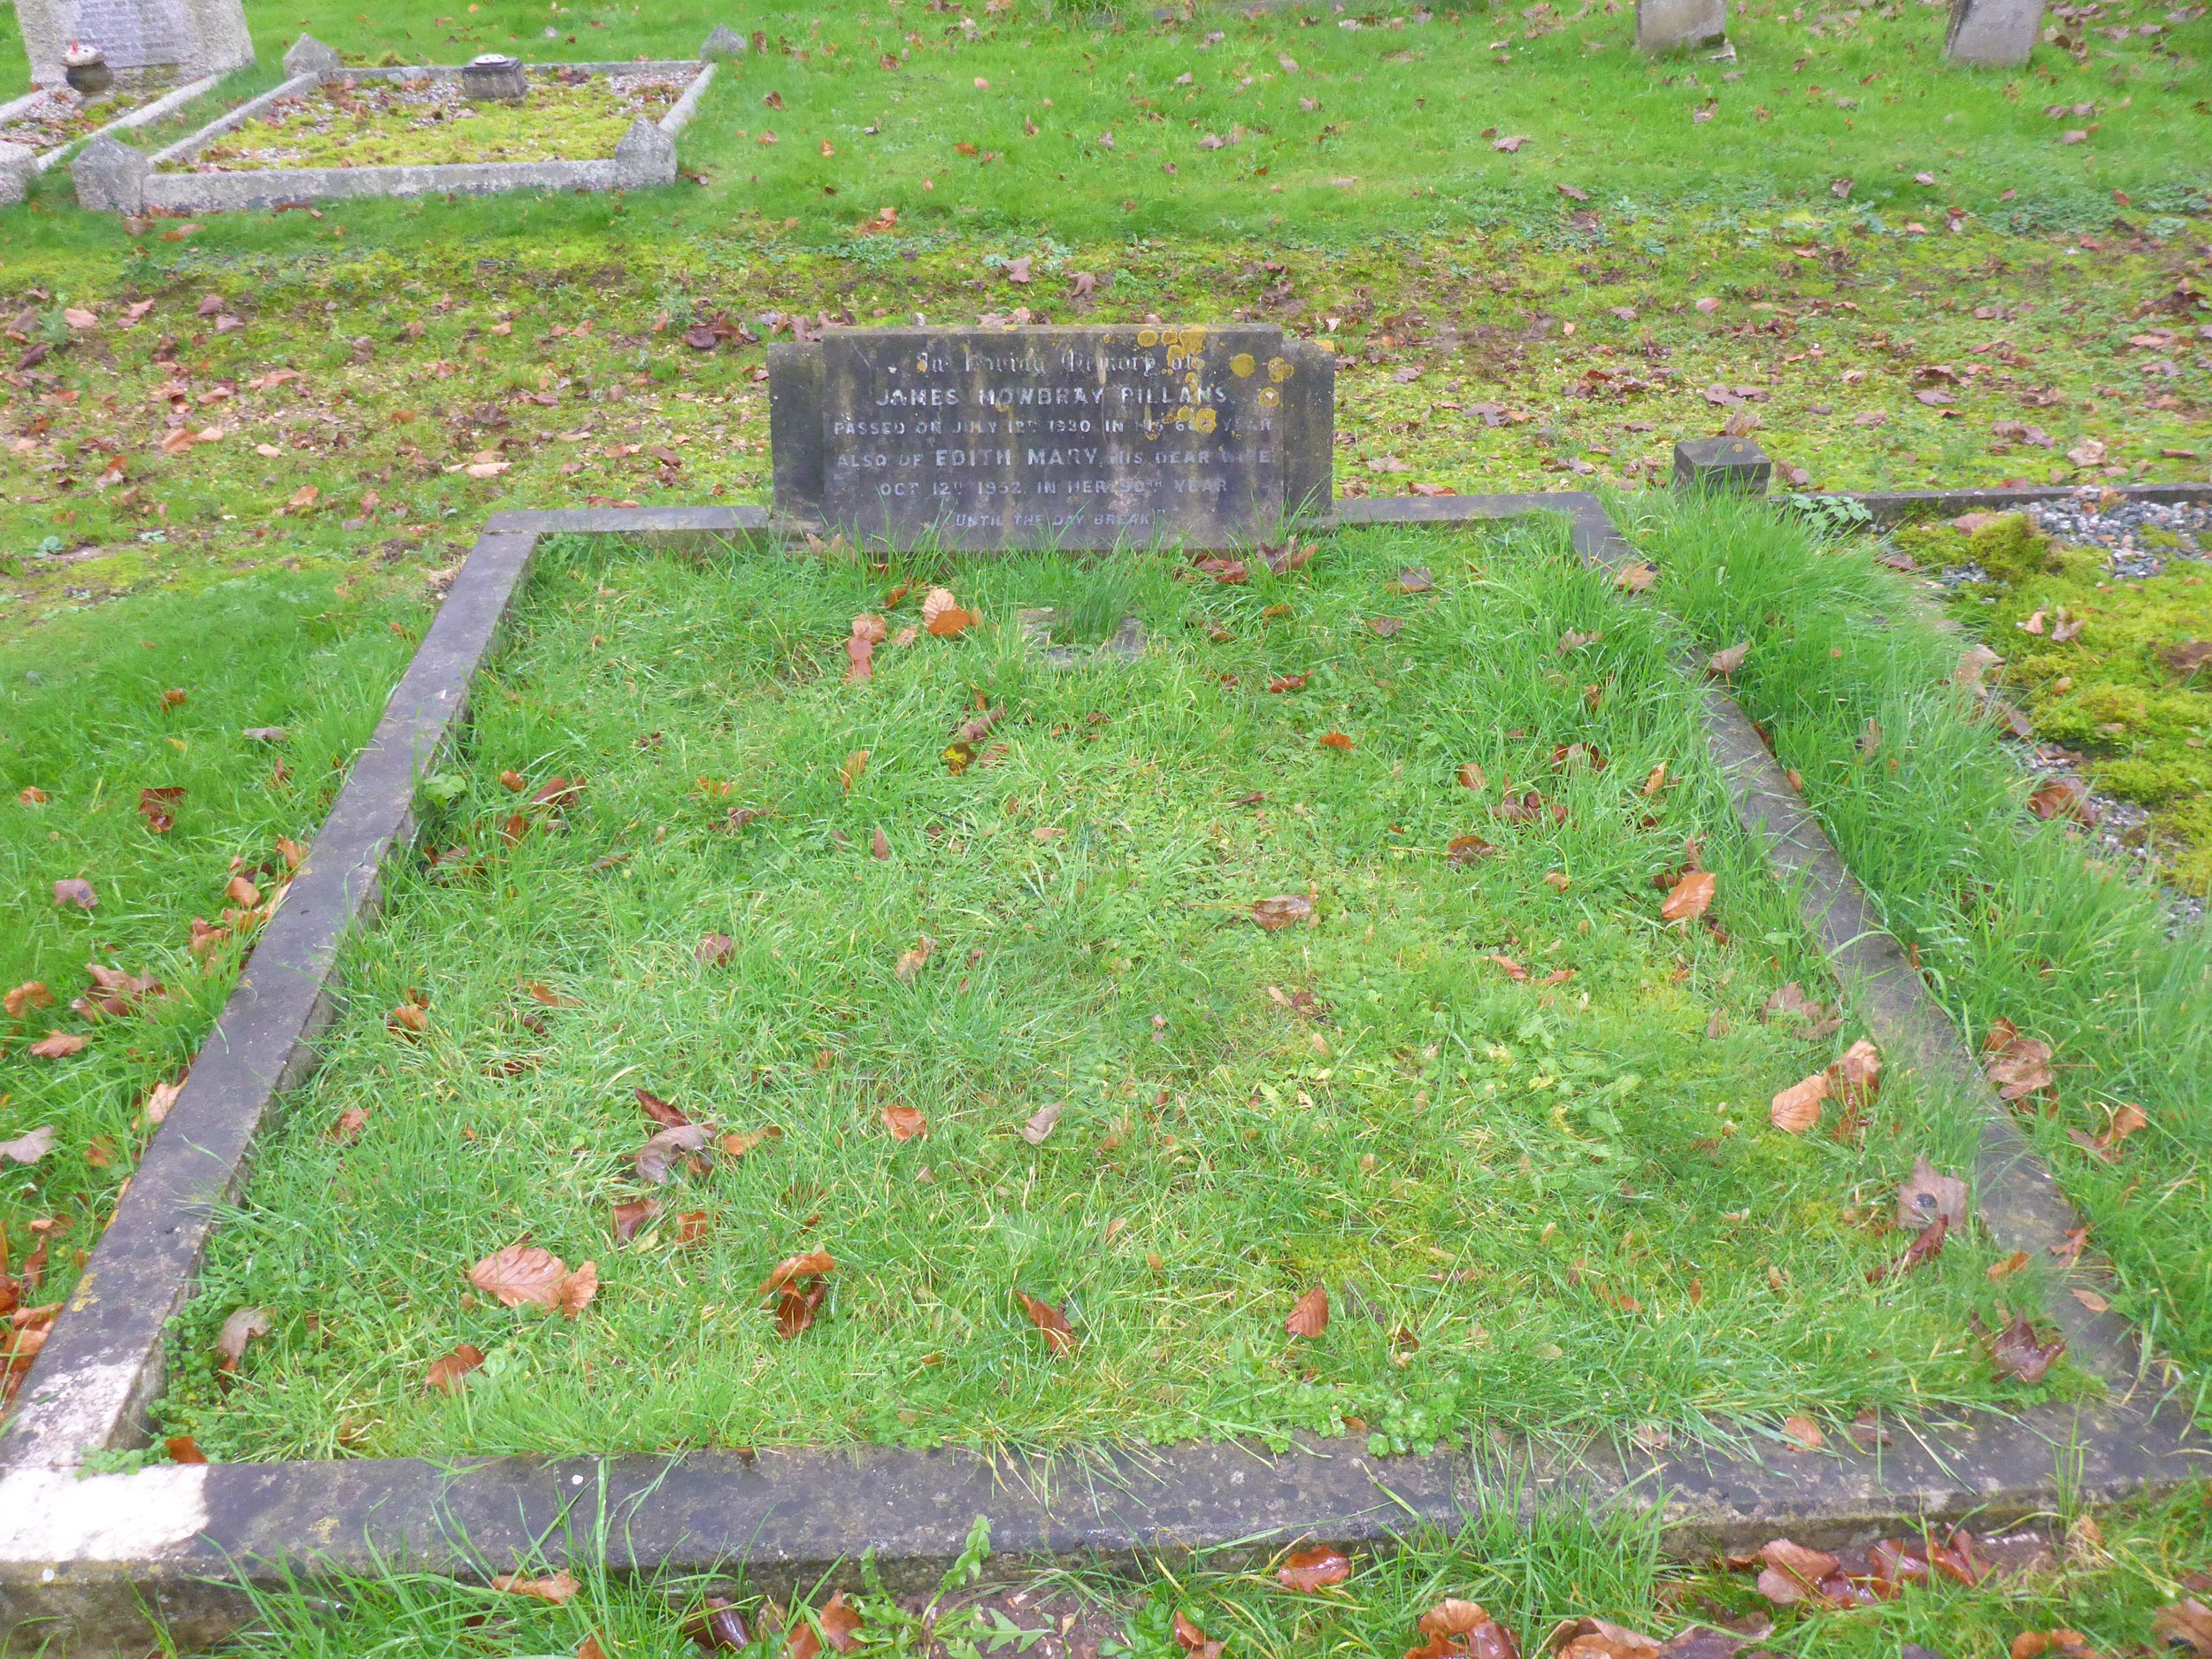  The Pillans plot is a double-width plot next to the path behind the War Memorial. 